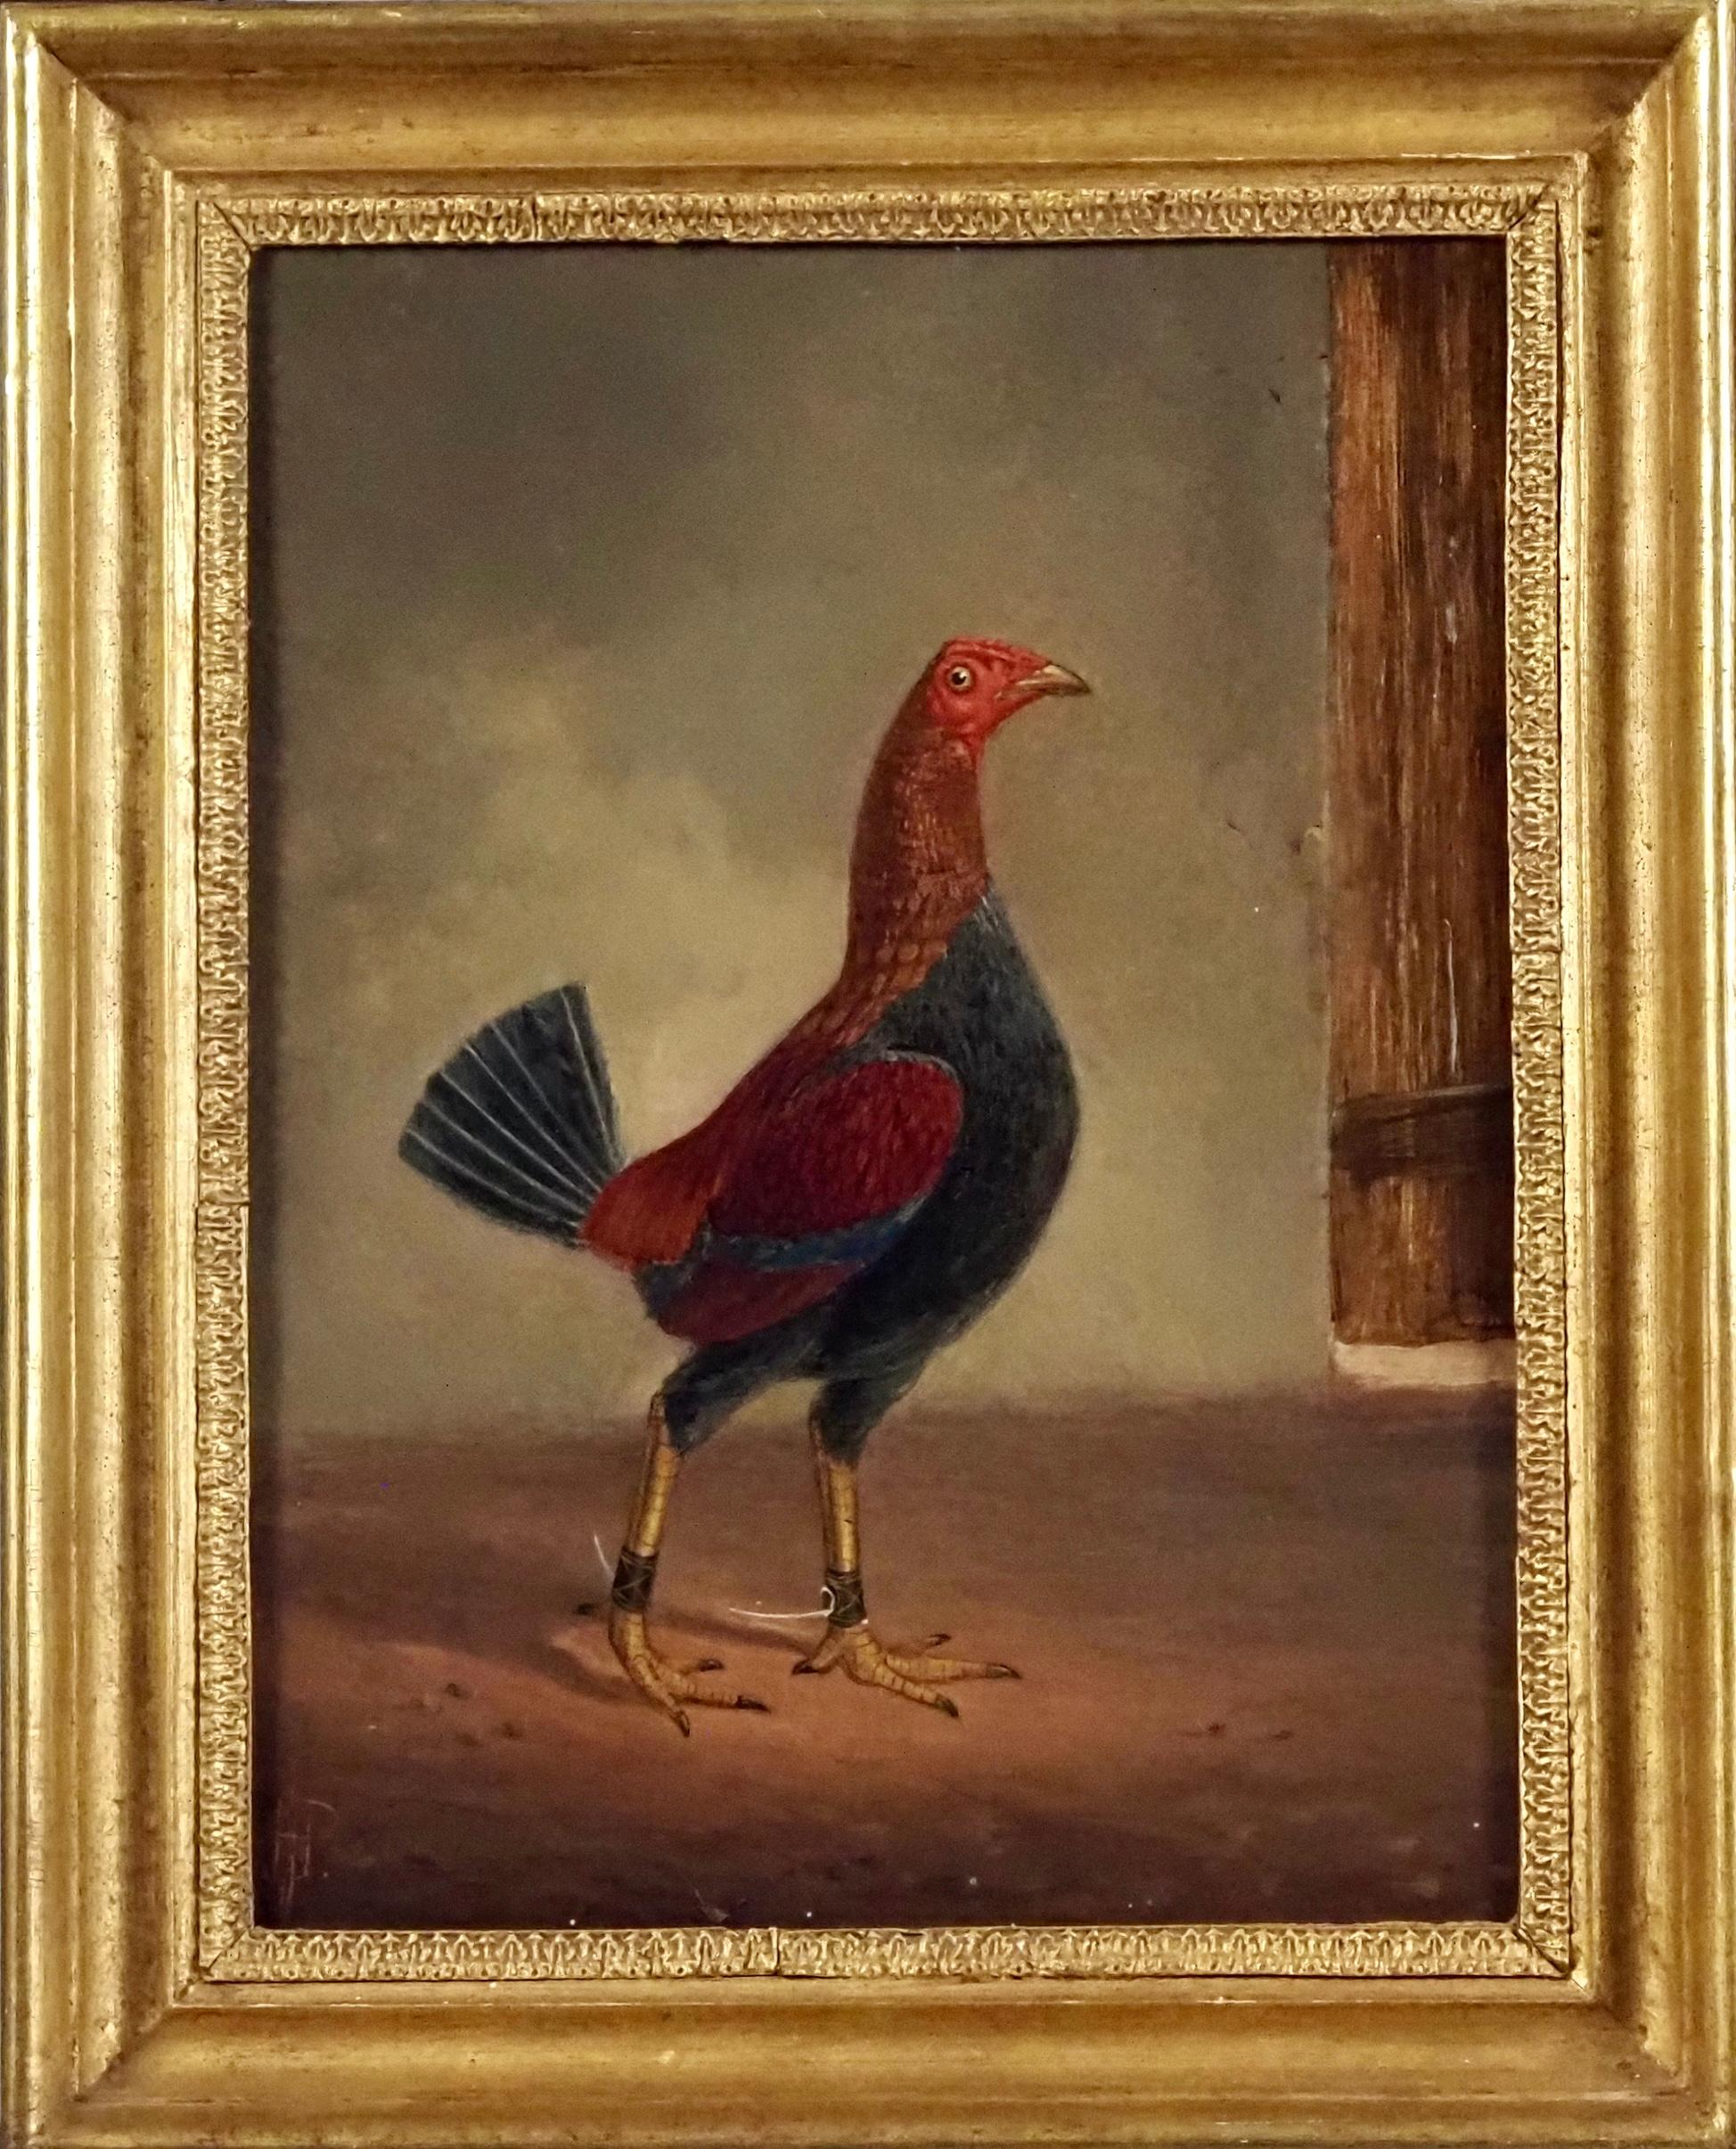 A dark-breasted fighting cock & A pale-breasted fighting cock facing - Painting by Hilton Lark Pratt